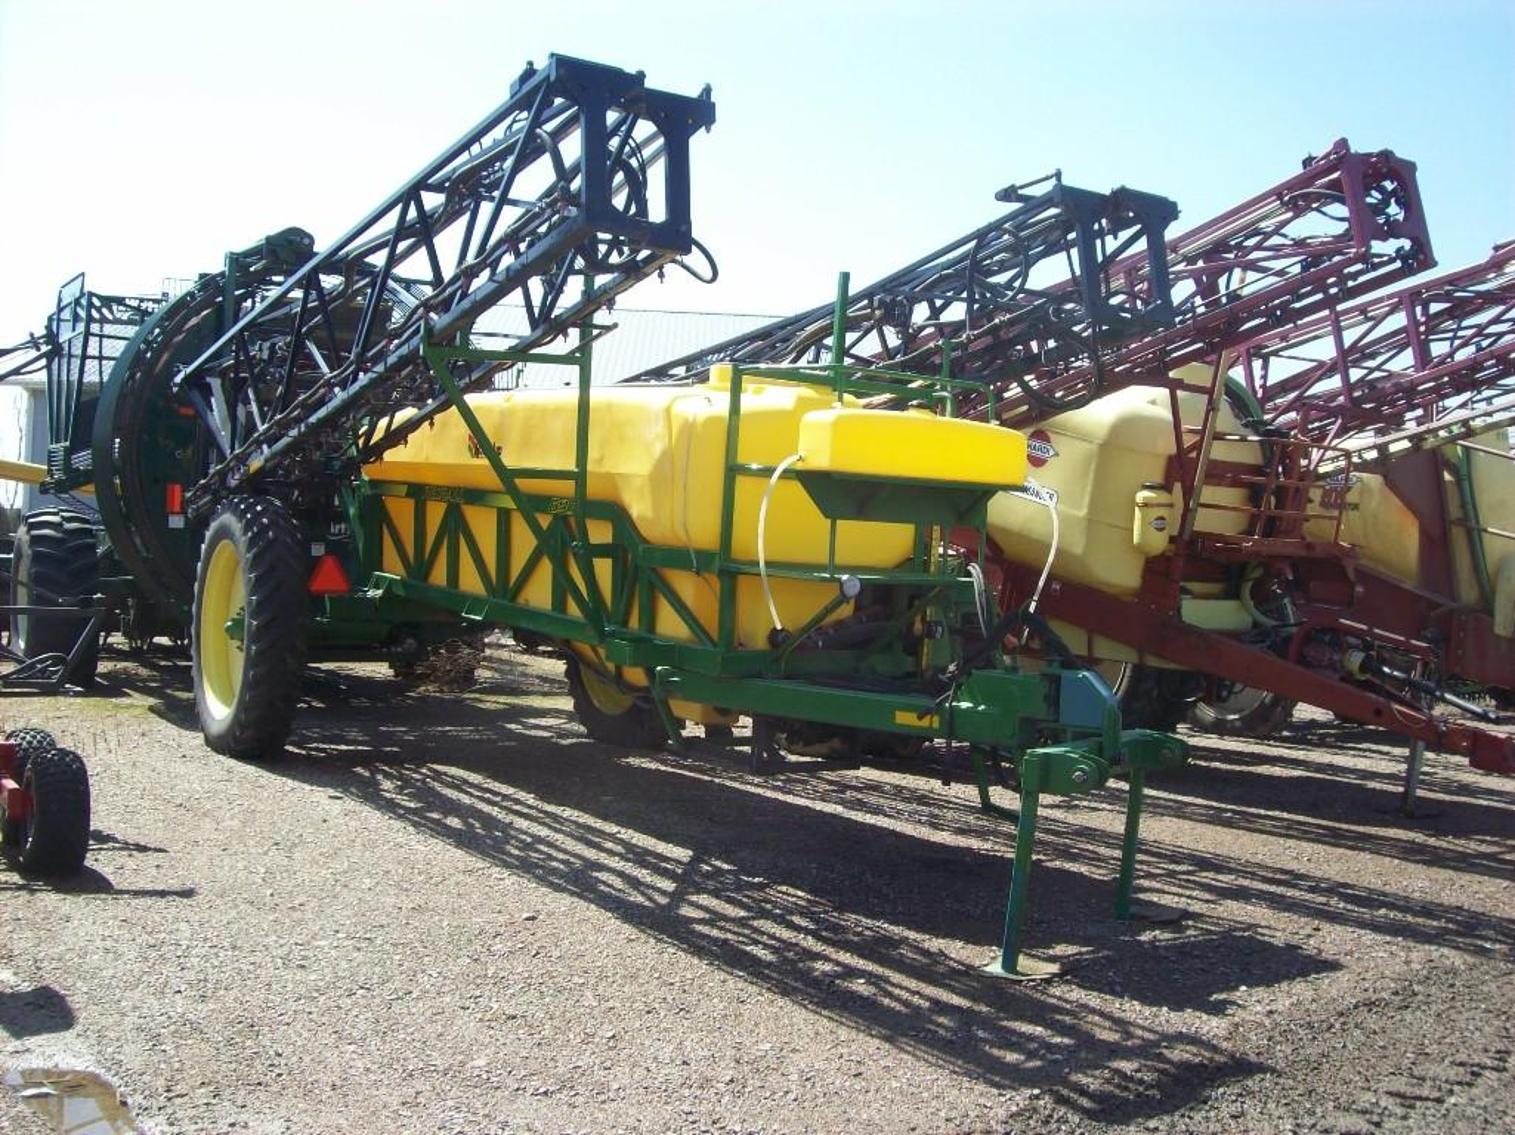 Farm Machinery Consignment Auction